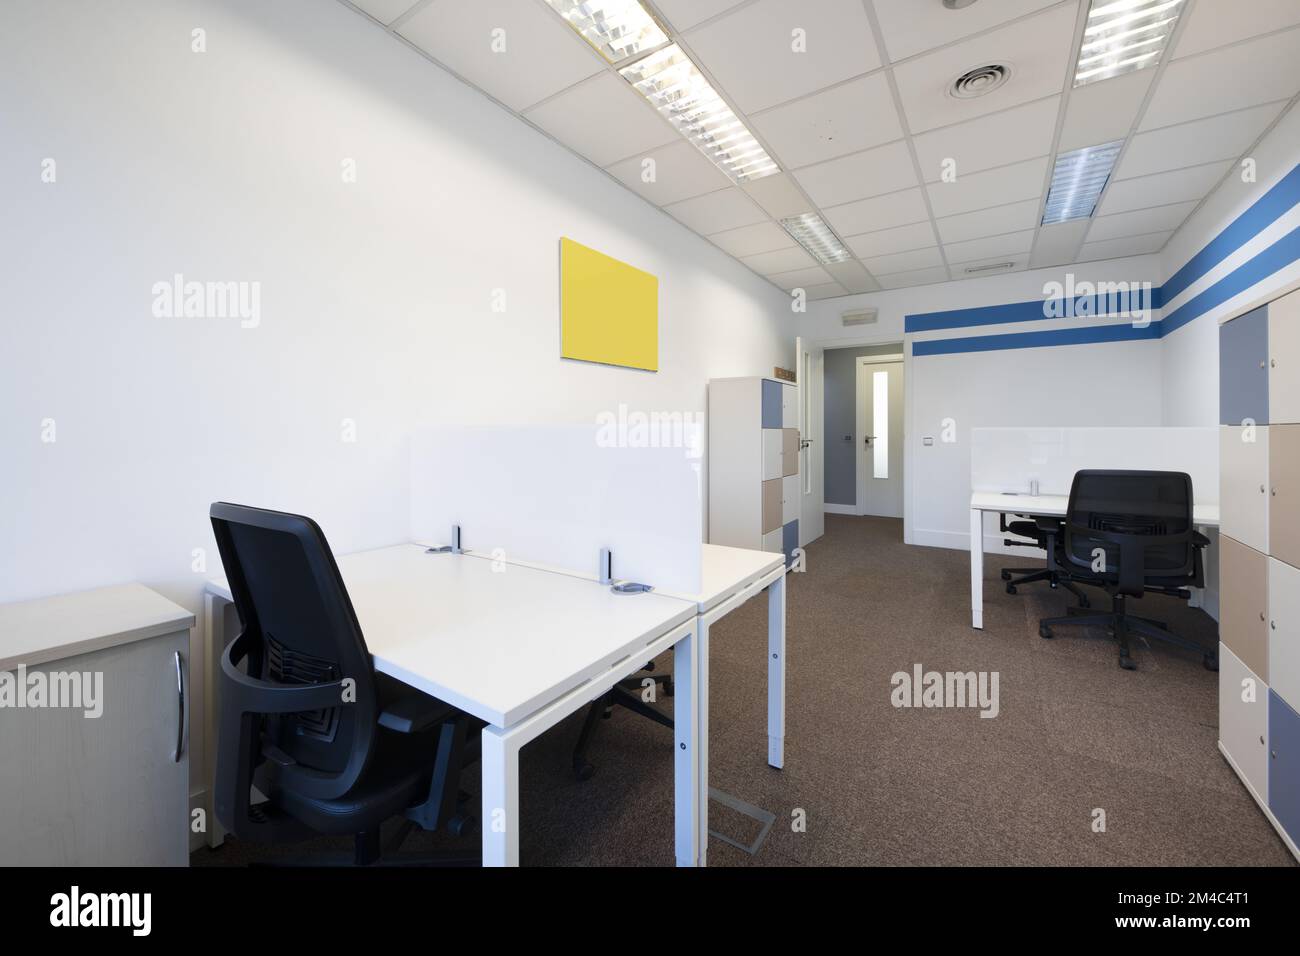 Several empty corporate work desks with divider screens and filing cabinets Stock Photo